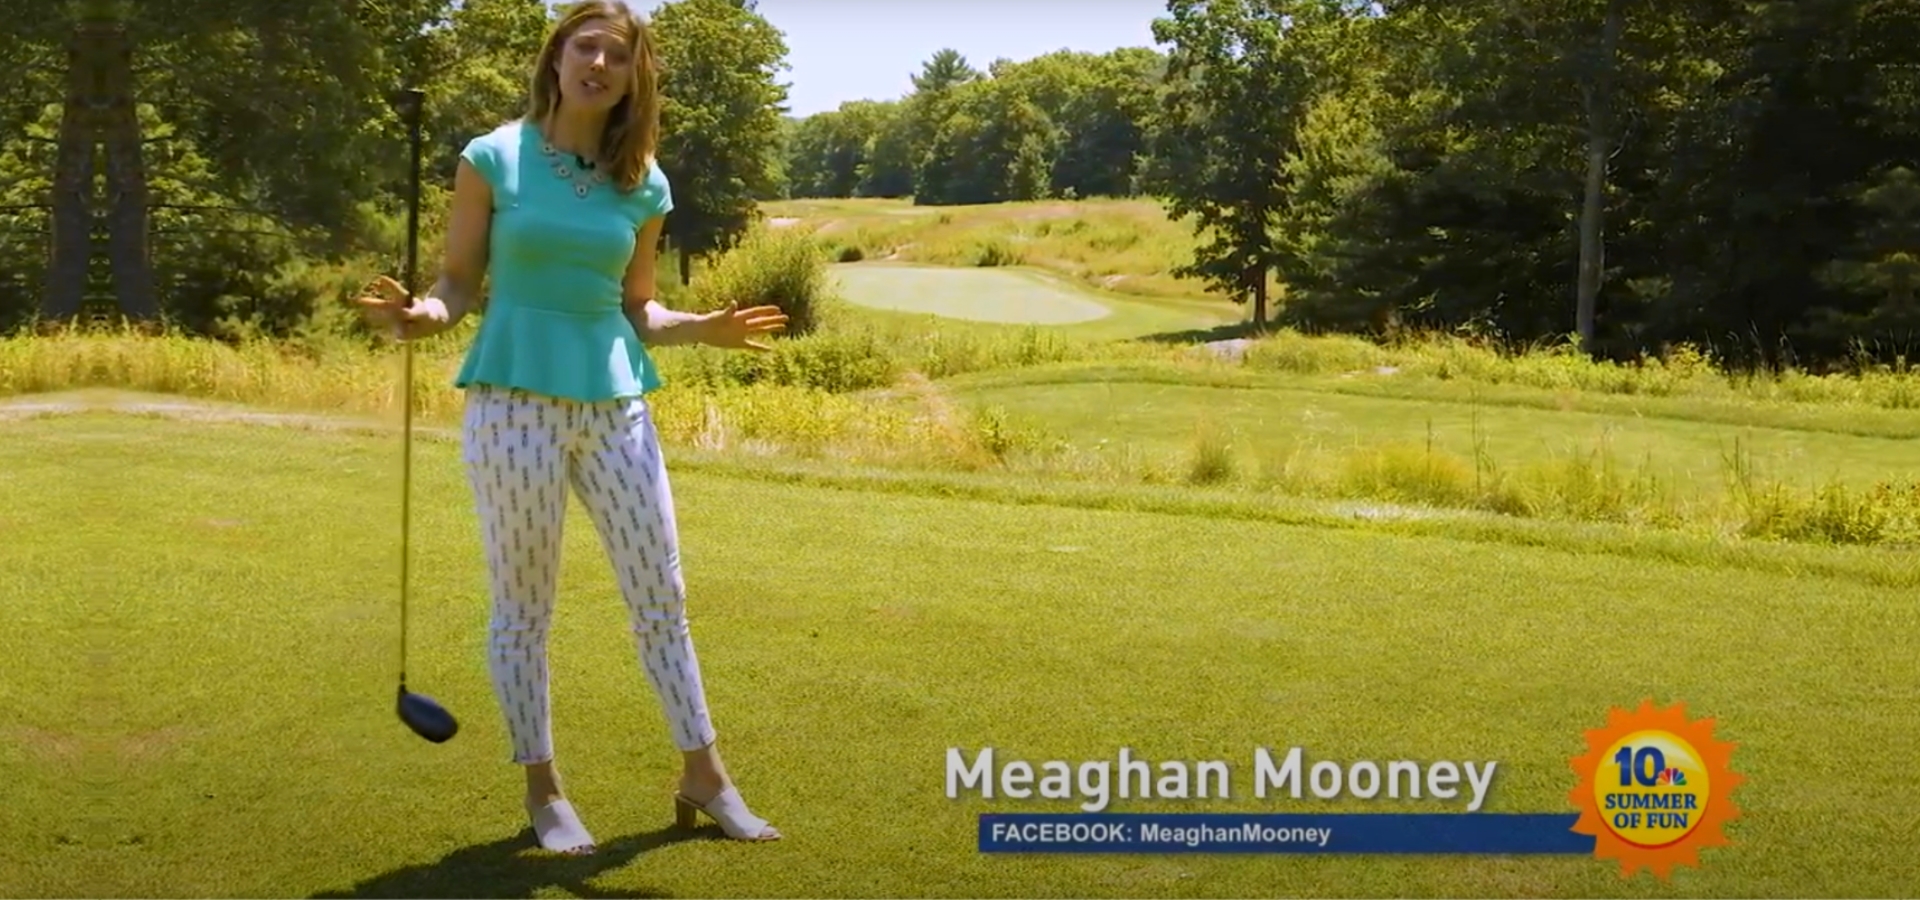 Meaghan Mooney at The Preserve's Golf Course - Highlighted on NBC 10's Summer of Fun.